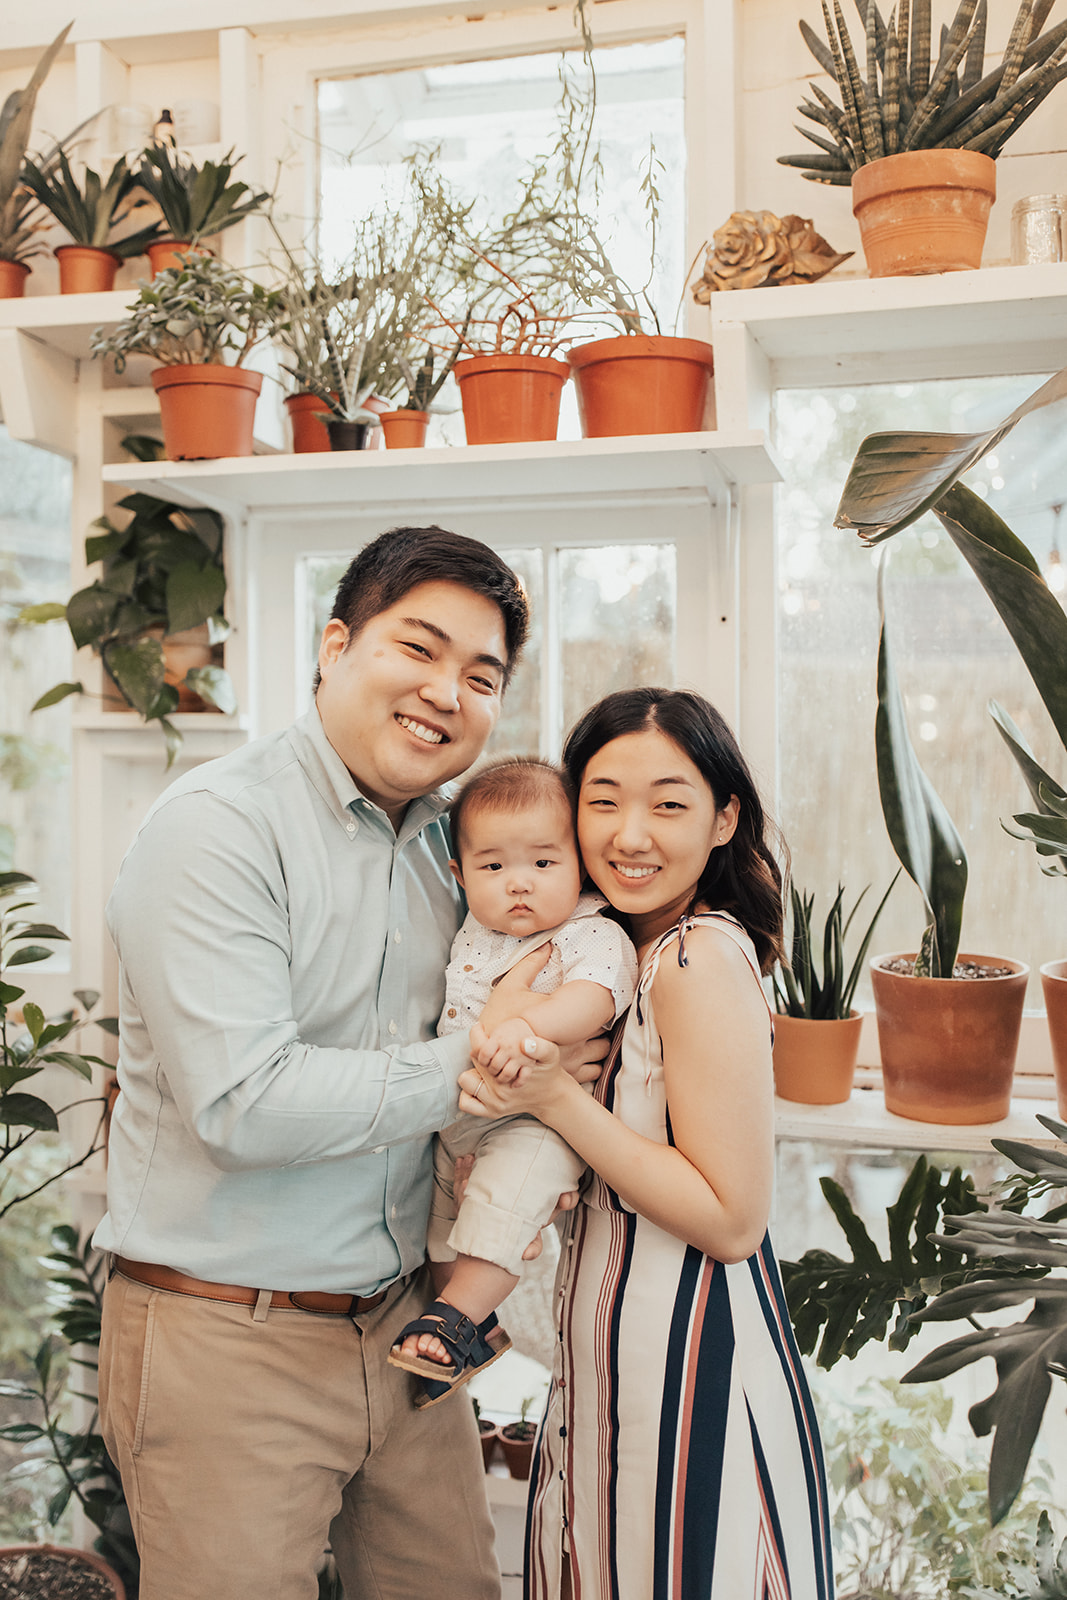 East Nashville Greenhouse family session by Fields & Freckles Photography